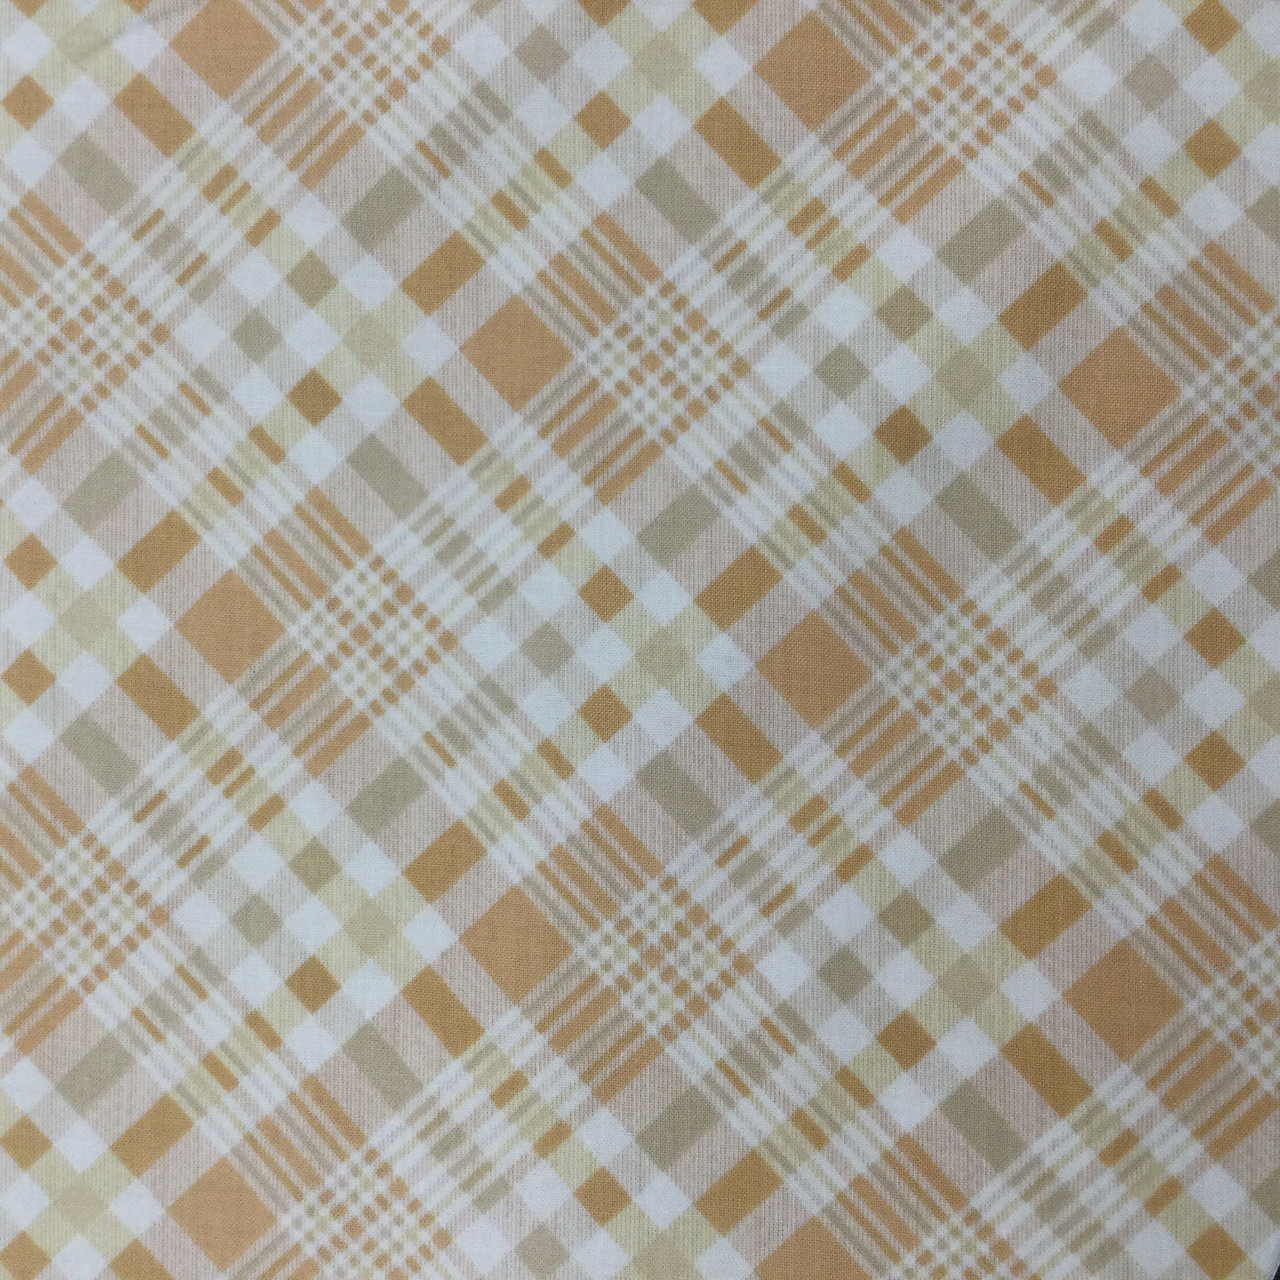 Tan & Brown Fabric For Quilting